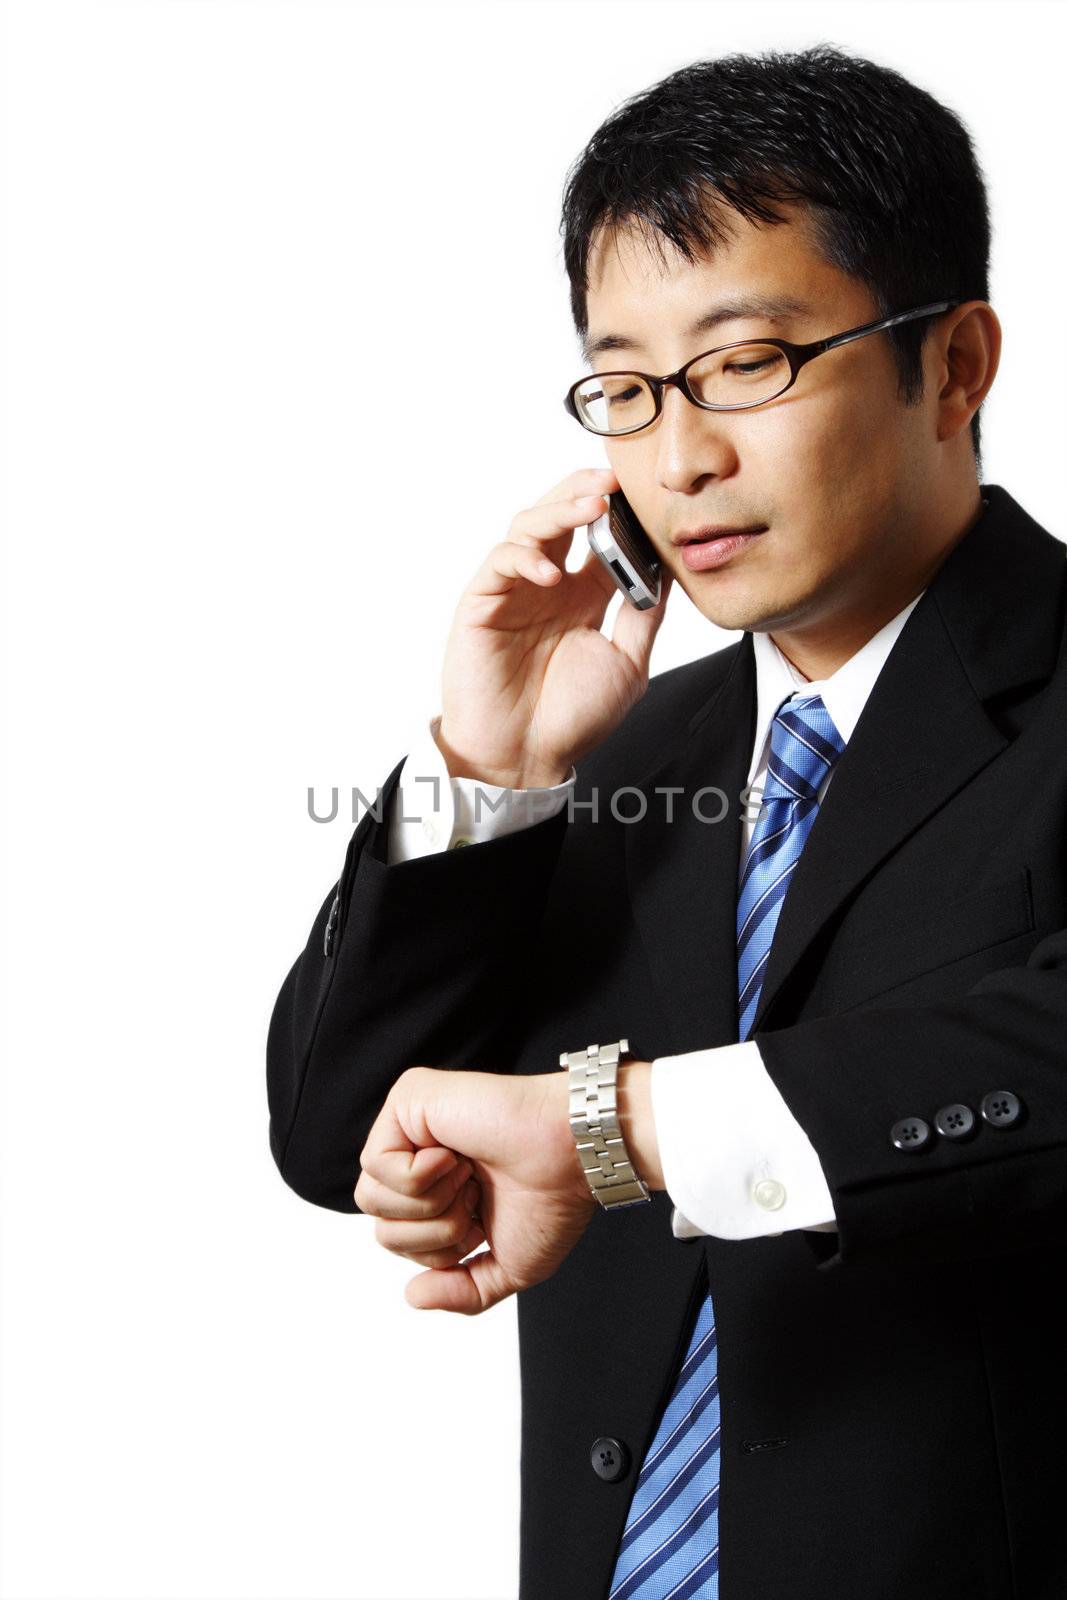 Busy businessman by aremafoto